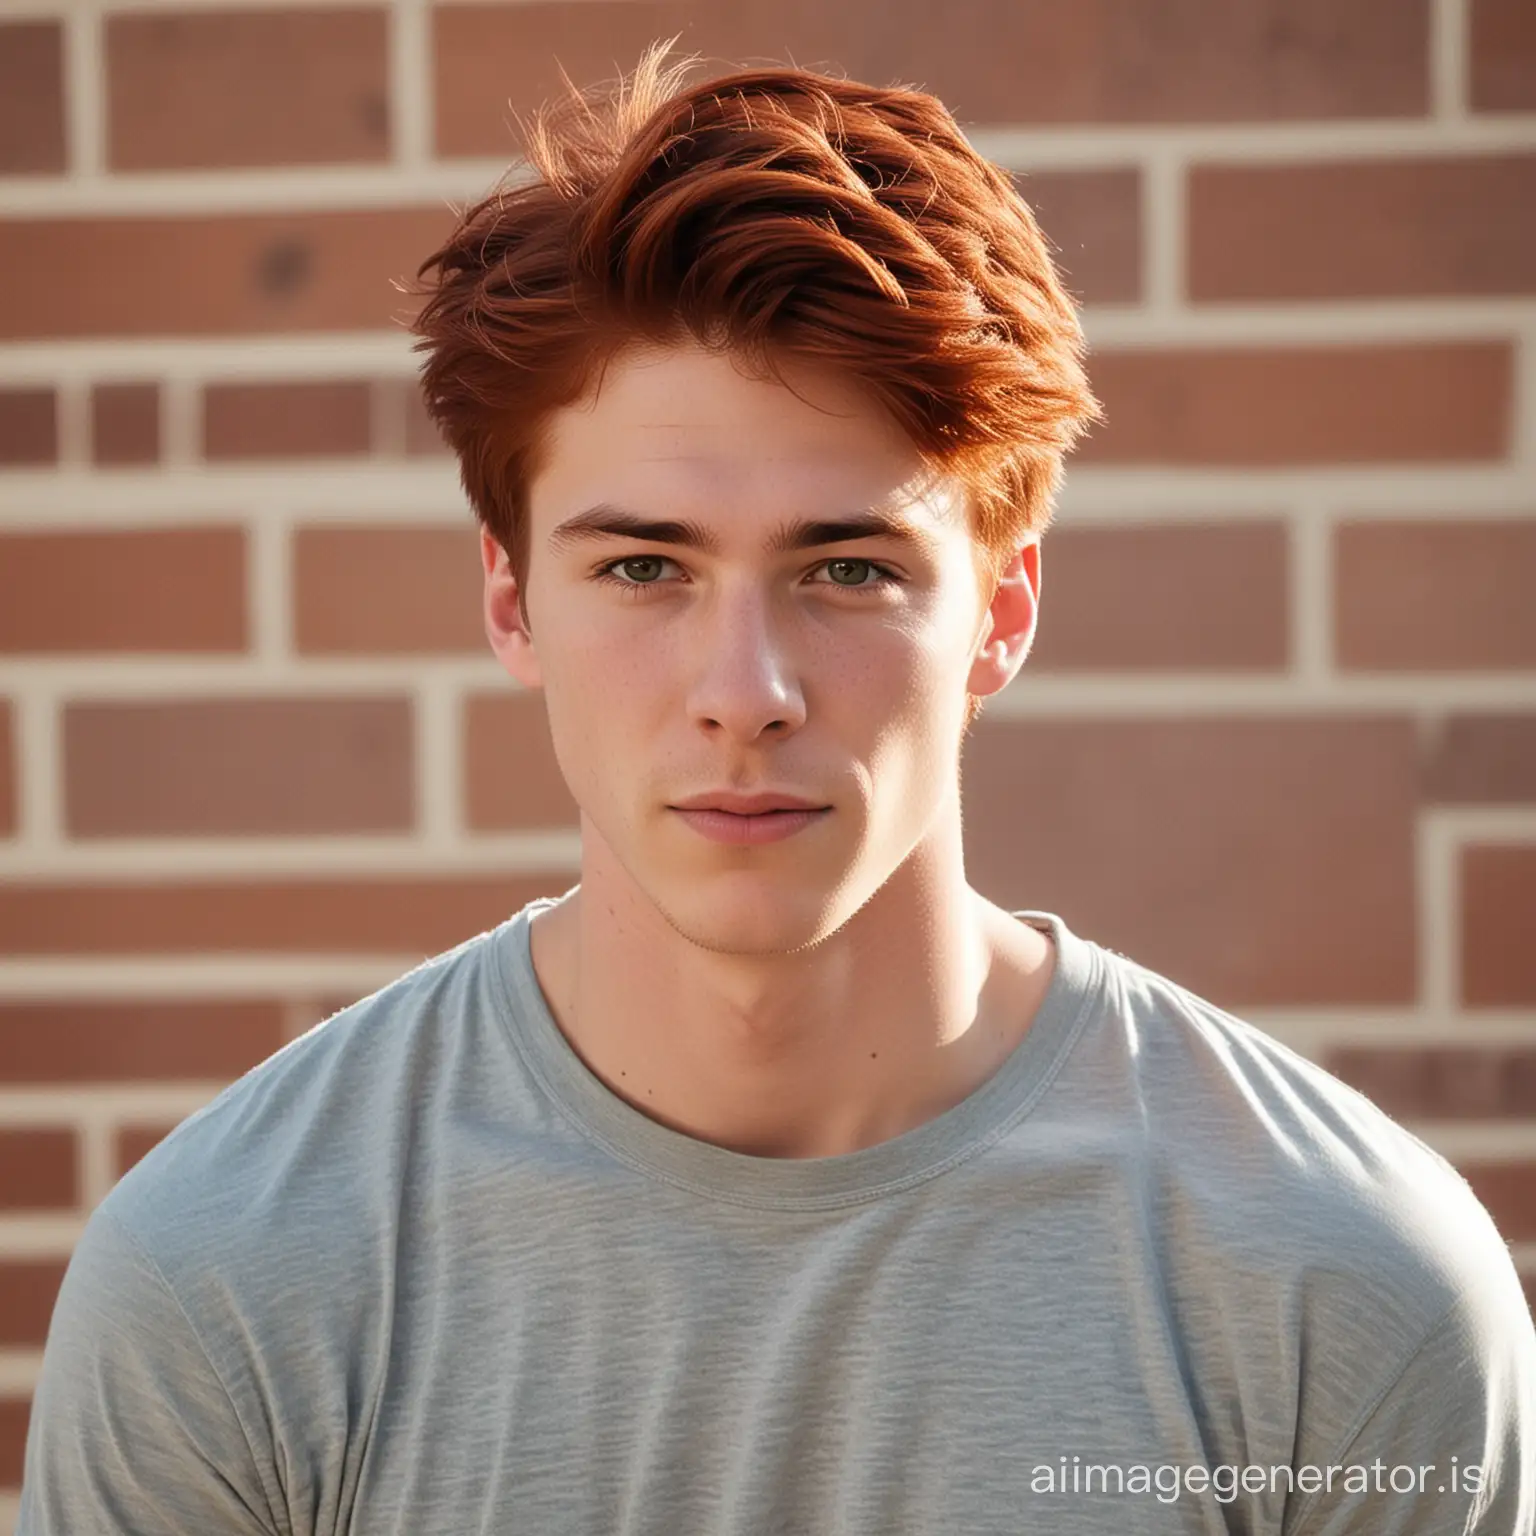 Young-Man-with-Red-Hair-in-Casual-College-Attire